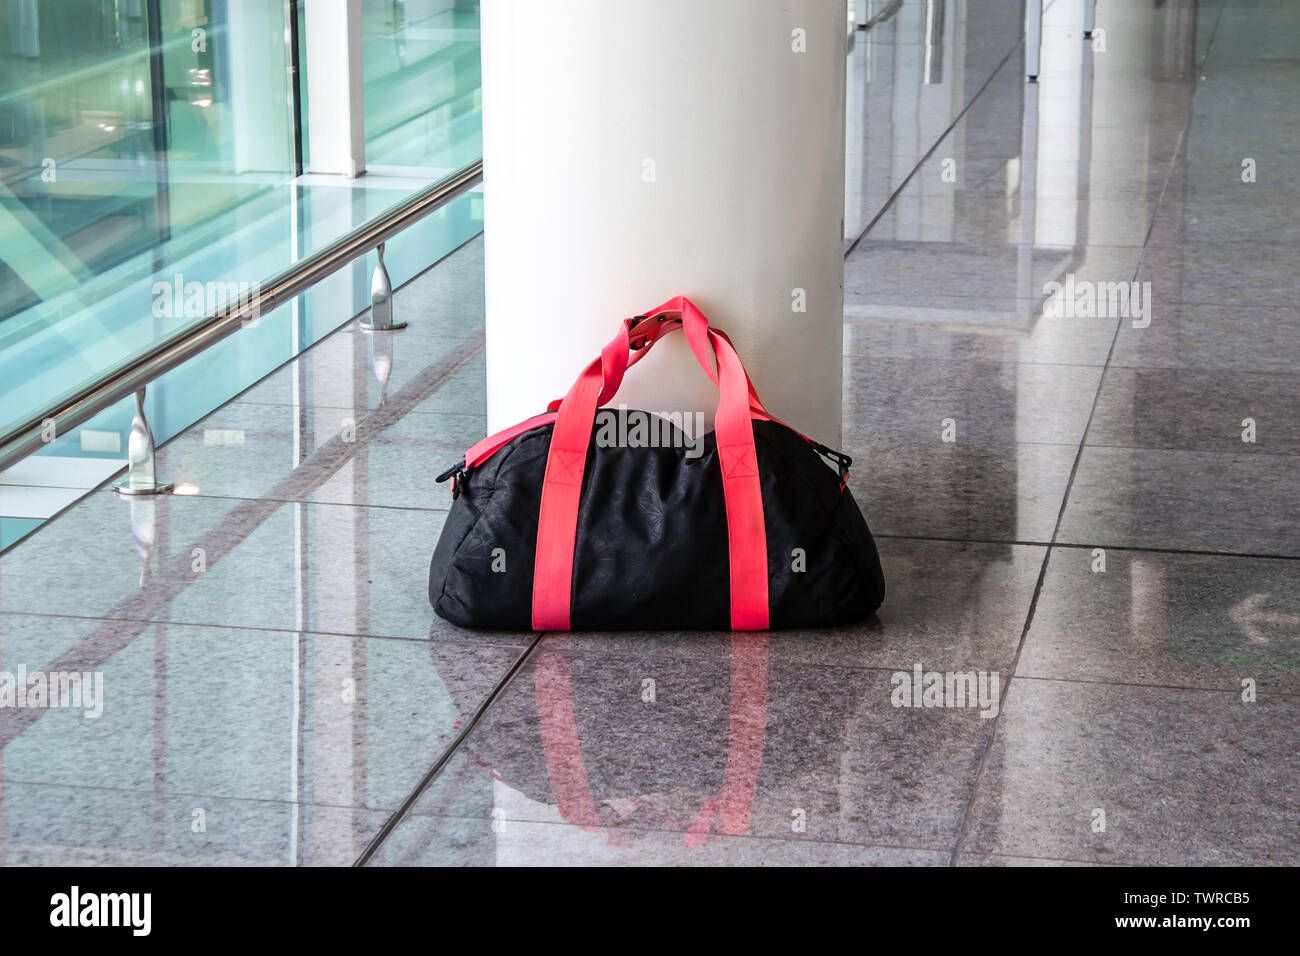 Suspicious black and red bag left unattended in an empty hall. Concept of terrorism and public safety. Stock Photo